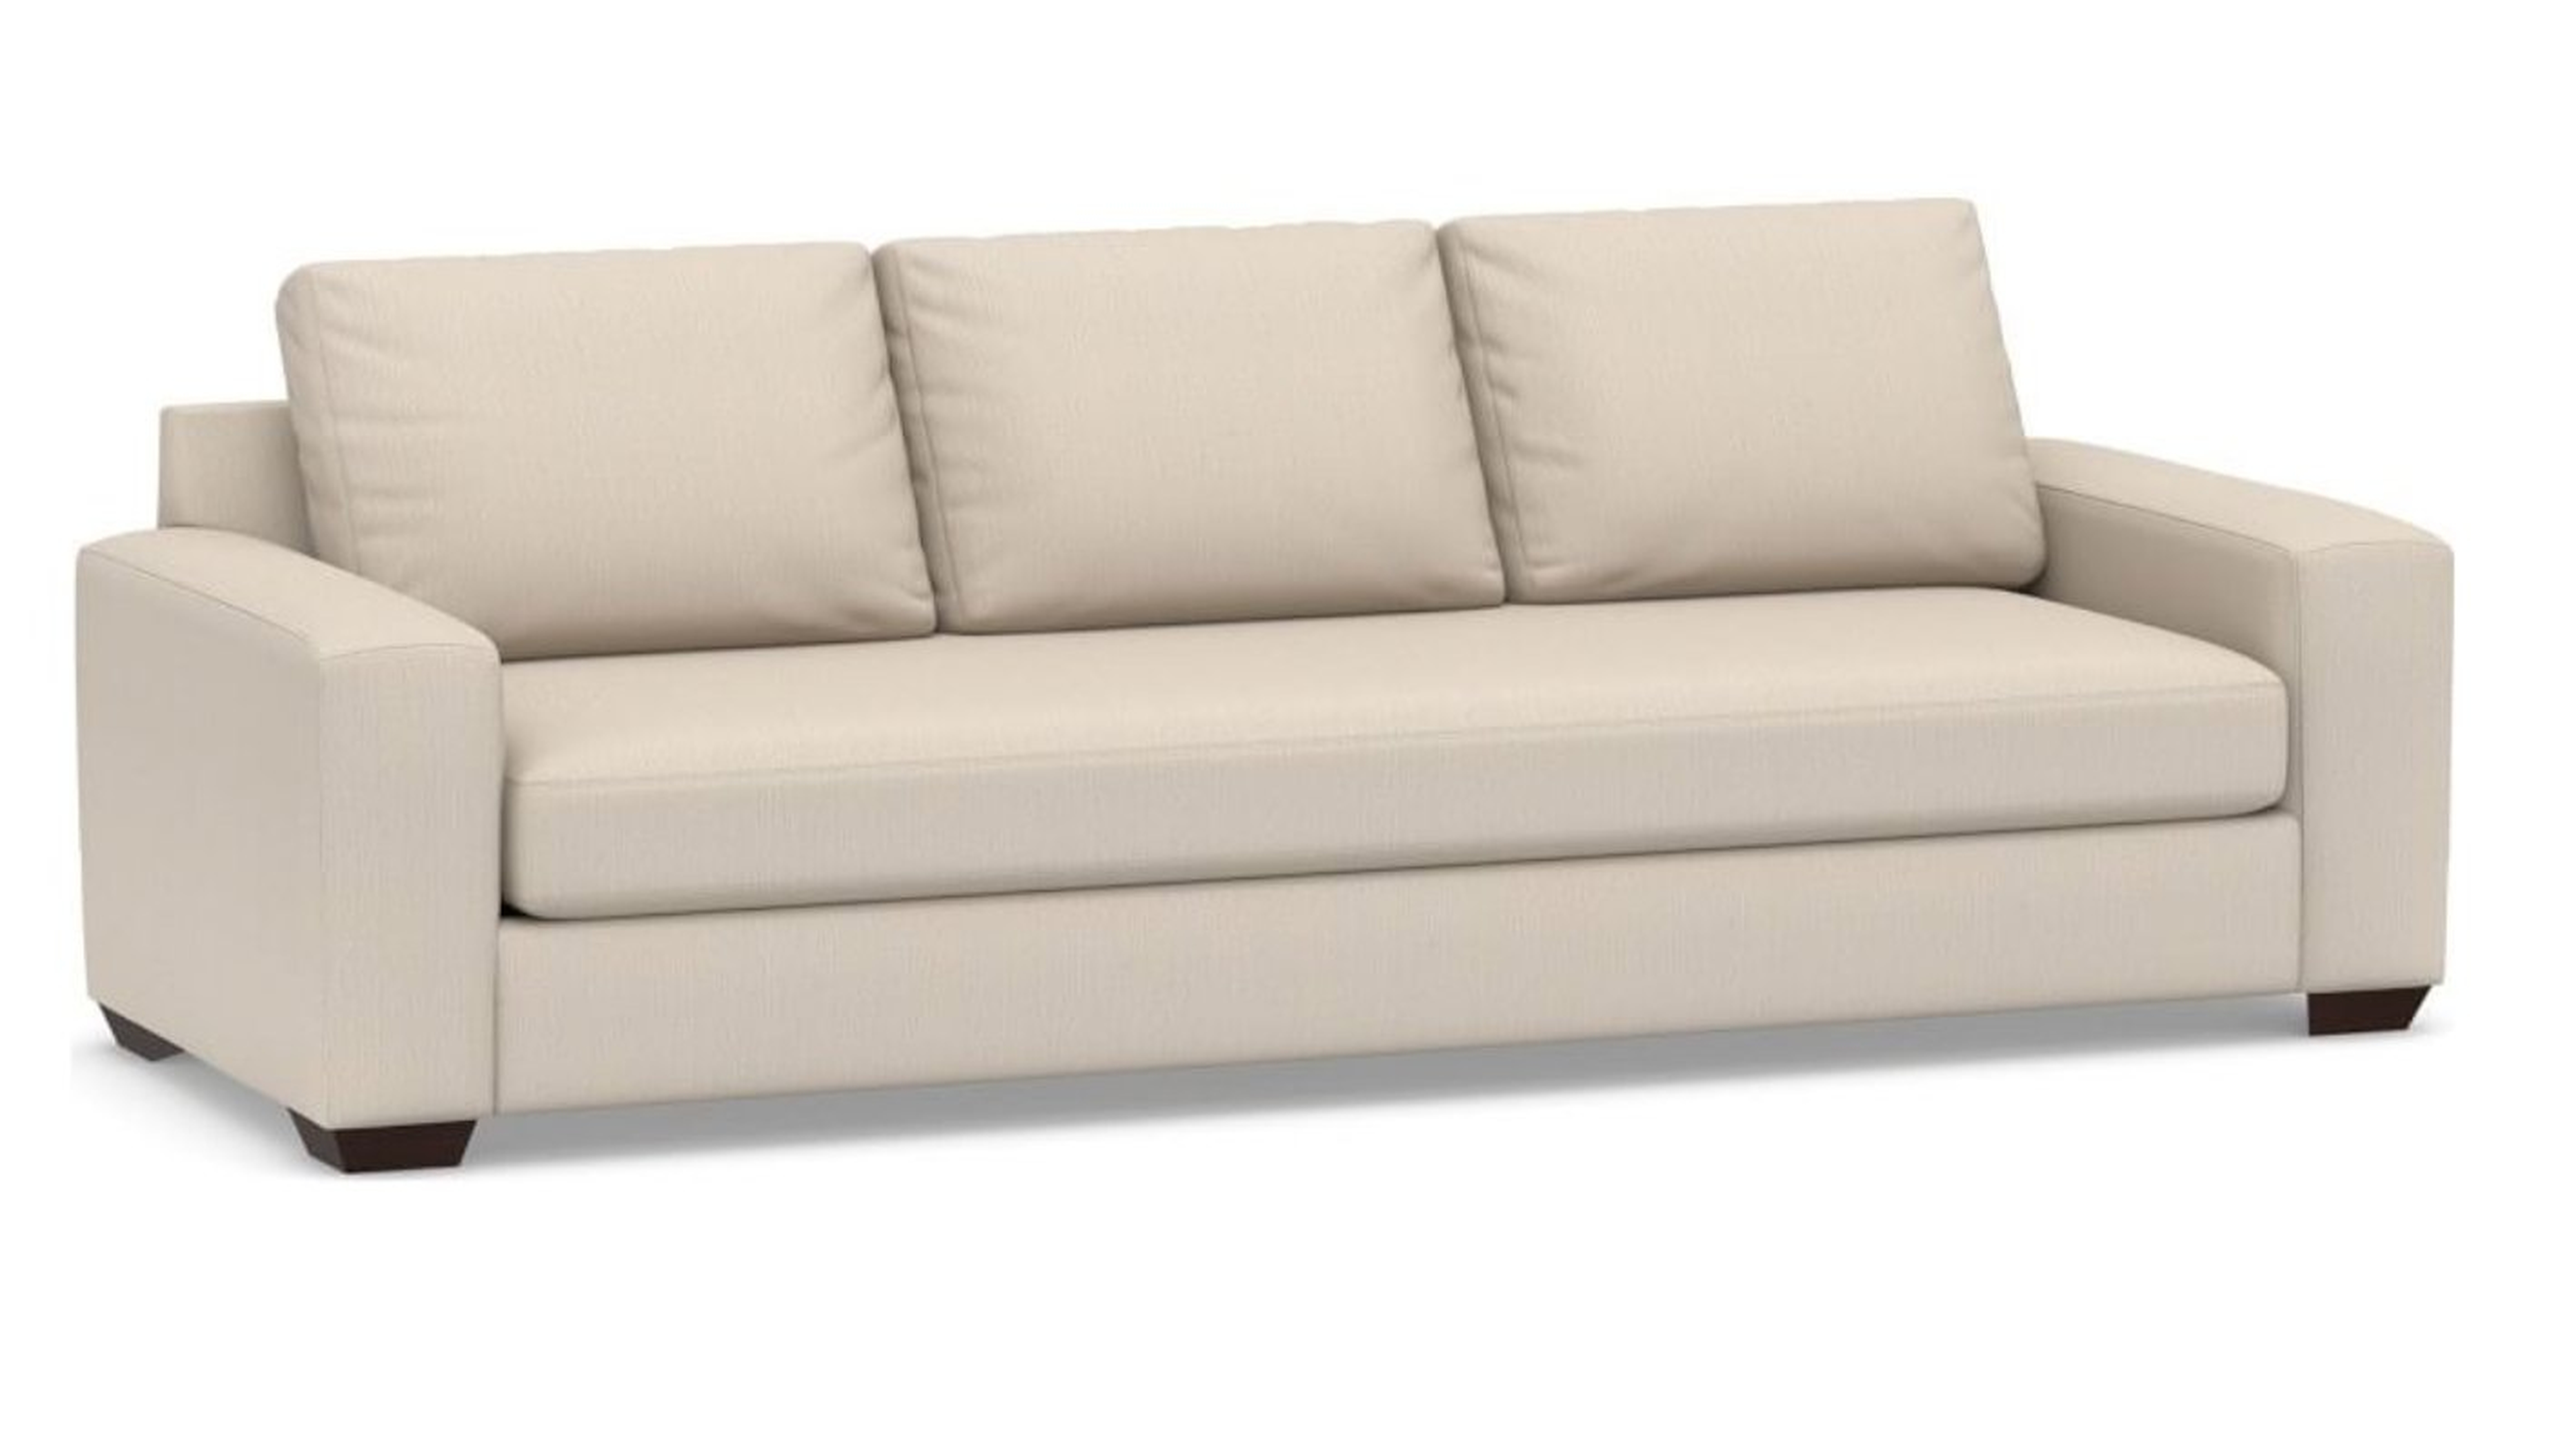 Big Sur Square Arm Upholstered Grand Sofa 105" with Bench Cushion, Down Blend Wrapped Cushions, Sunbrella(R) Performance Herringbone Oatmeal - Pottery Barn